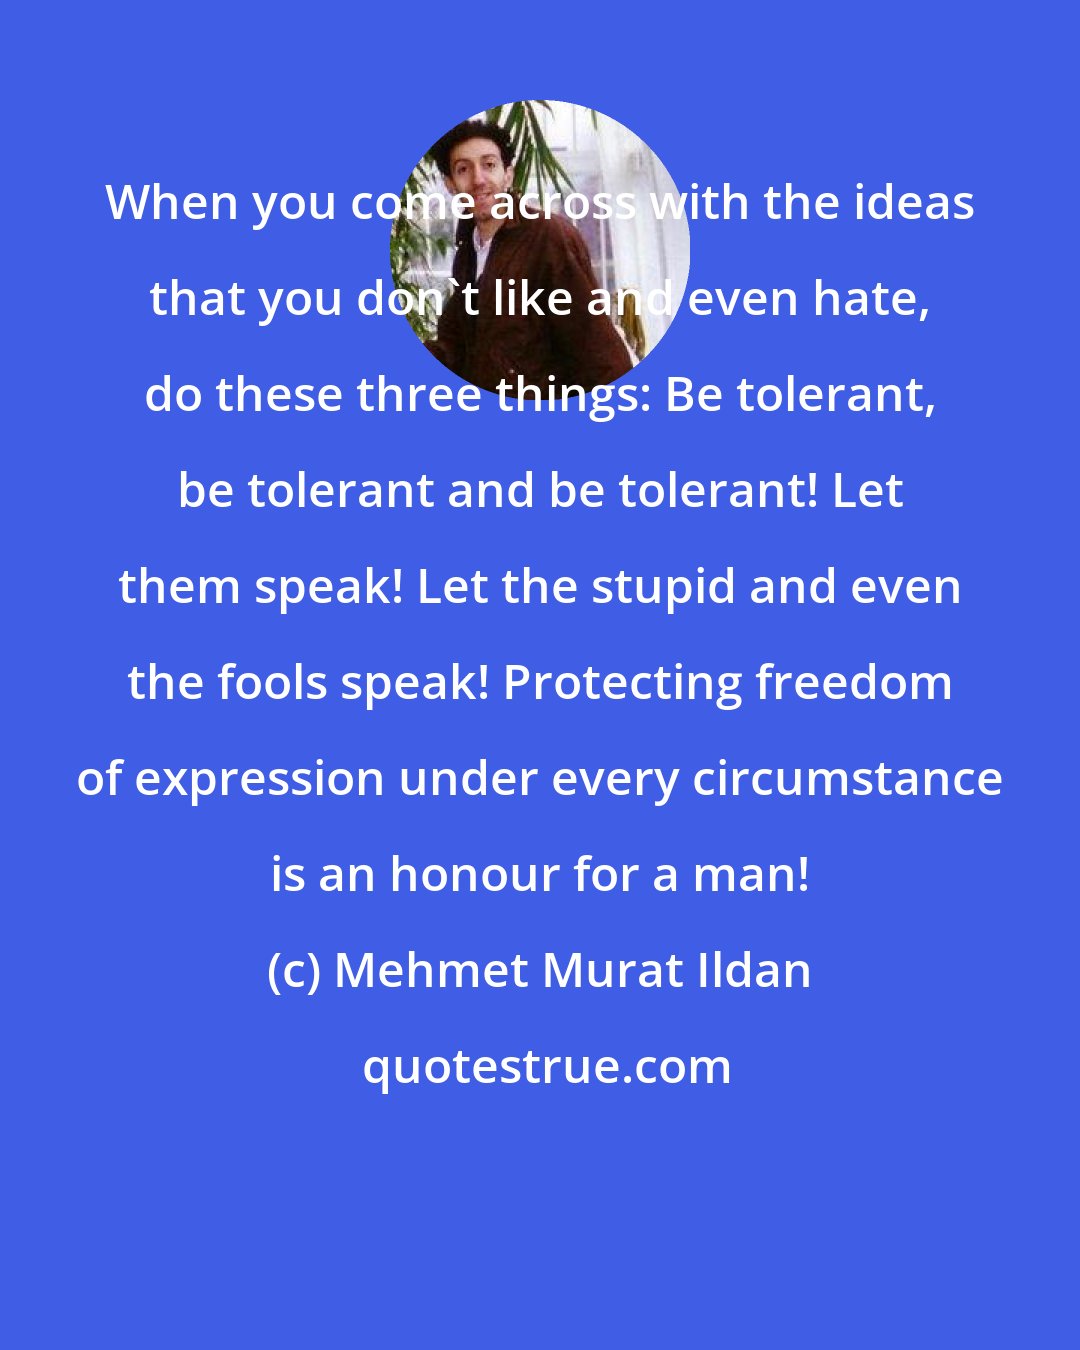 Mehmet Murat Ildan: When you come across with the ideas that you don't like and even hate, do these three things: Be tolerant, be tolerant and be tolerant! Let them speak! Let the stupid and even the fools speak! Protecting freedom of expression under every circumstance is an honour for a man!